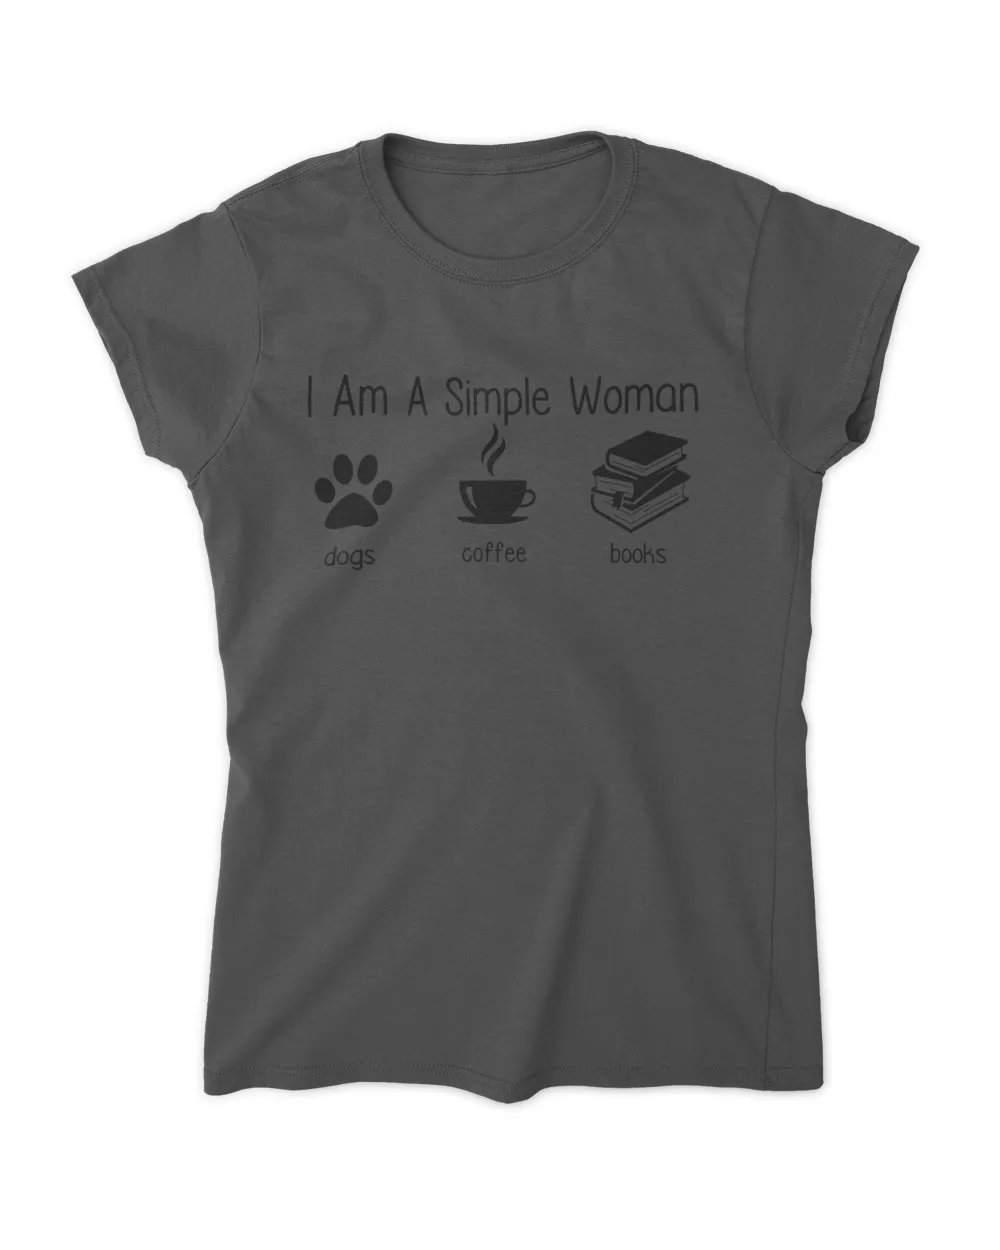 I am a simple woman dogs coffee books